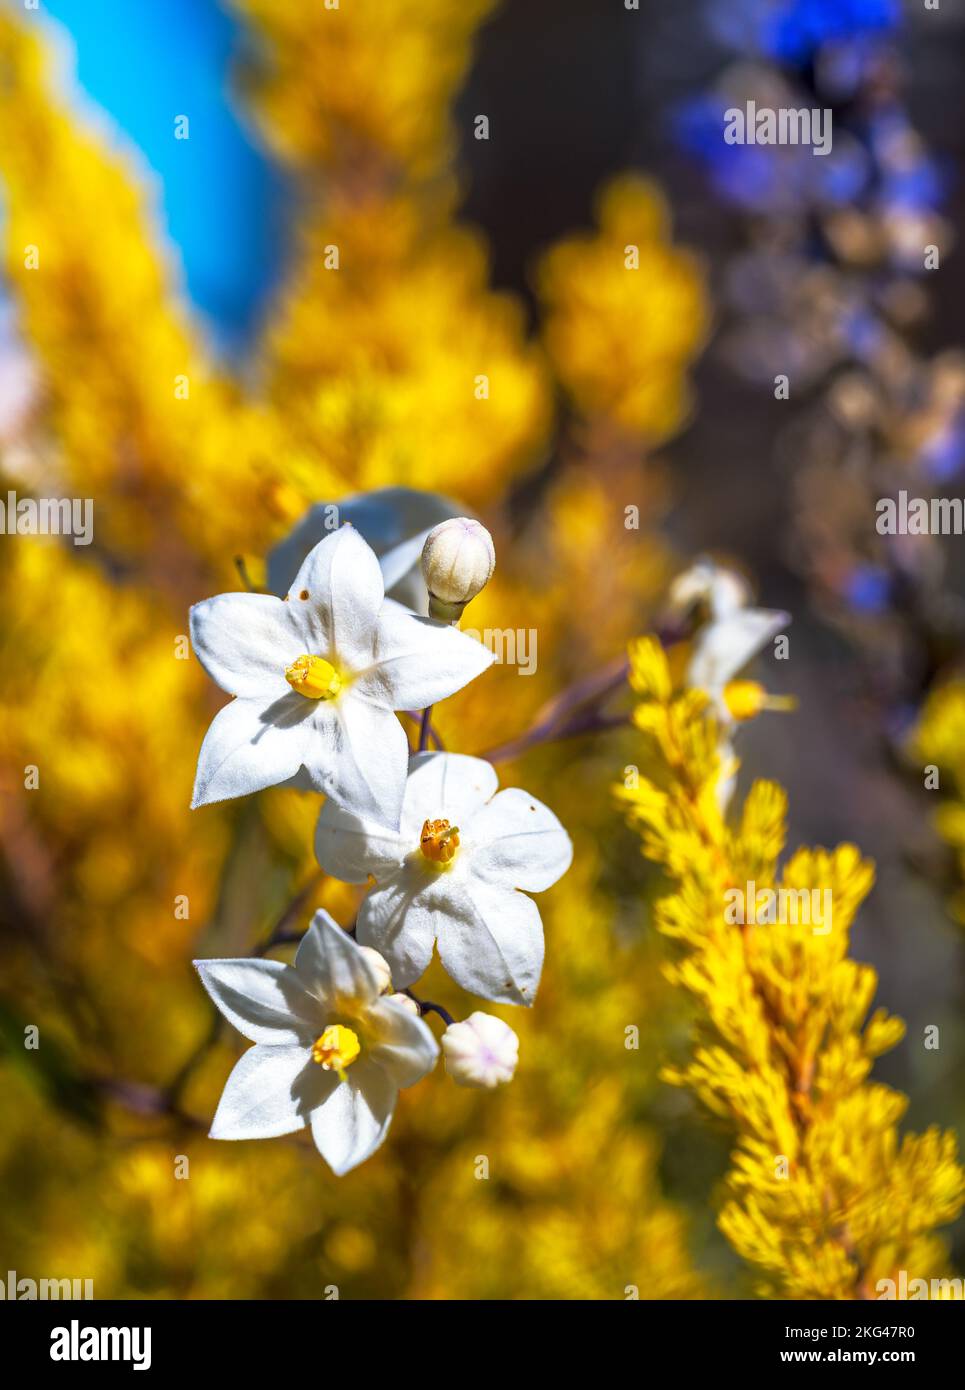 Macro of a jasmine nightshade flower and an autumn background Stock Photo